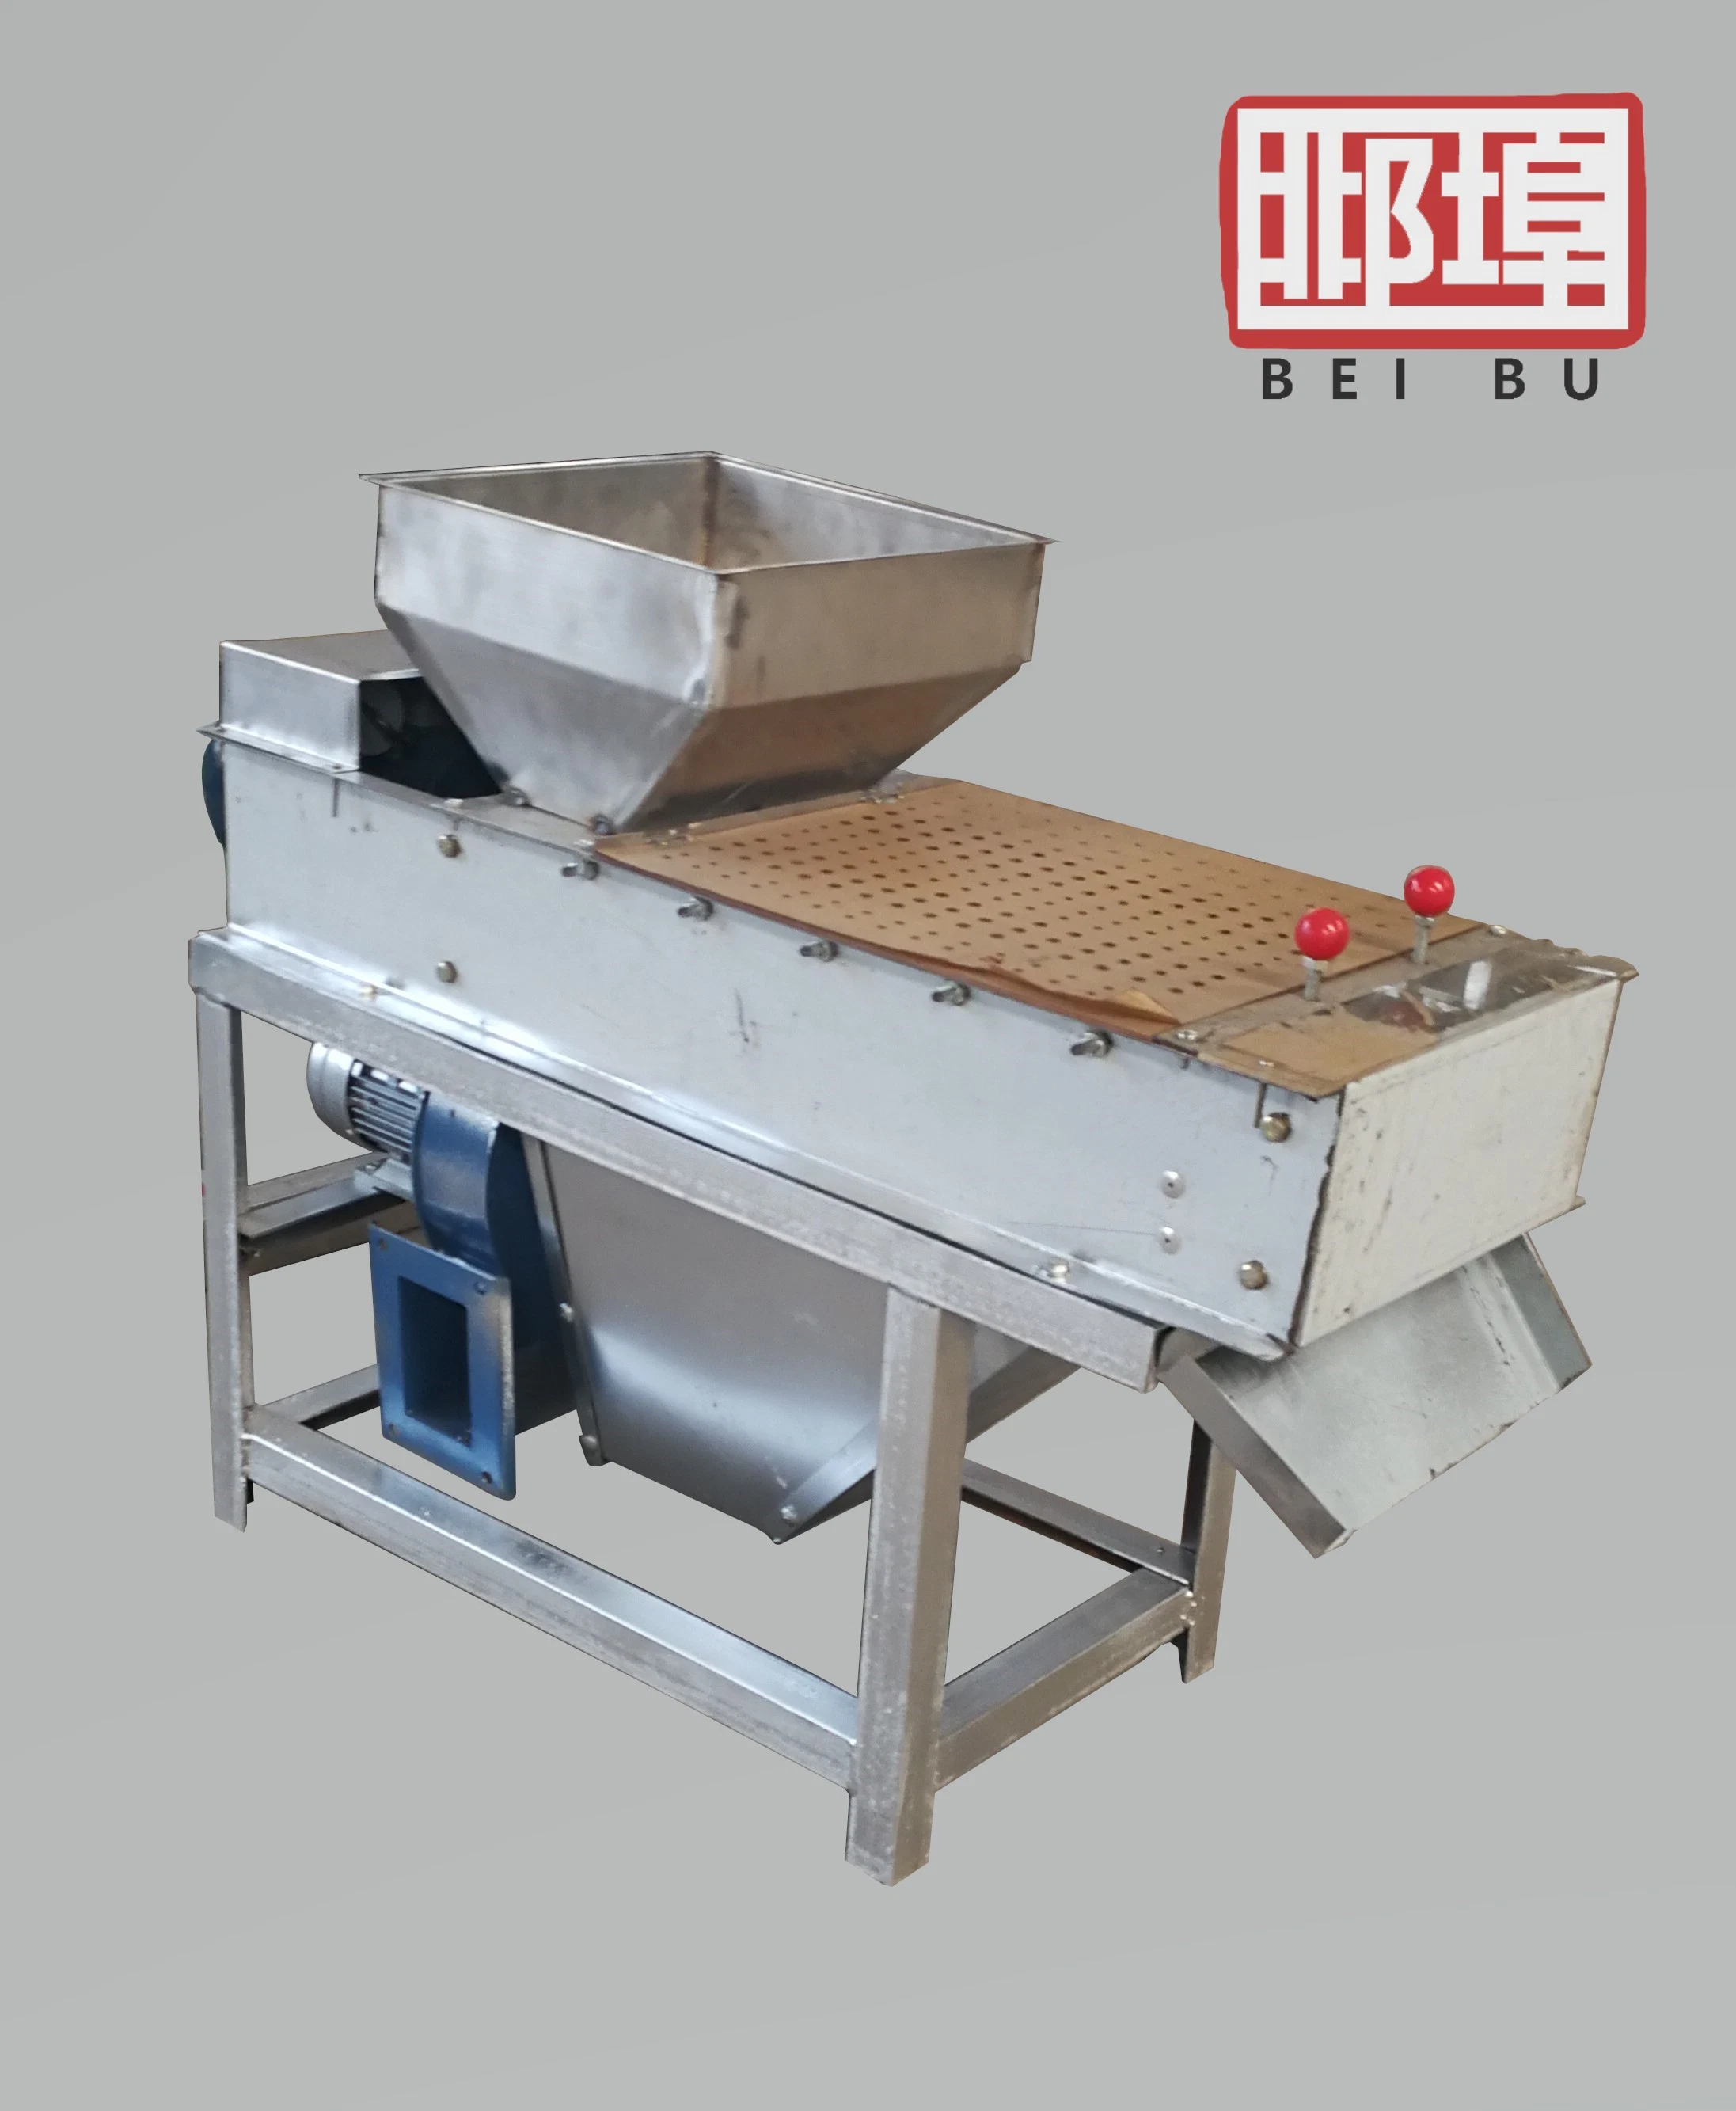 Tahini, Paste, Peanut Butter, Ground Nut Processing Machine. Agricultural Machinery.